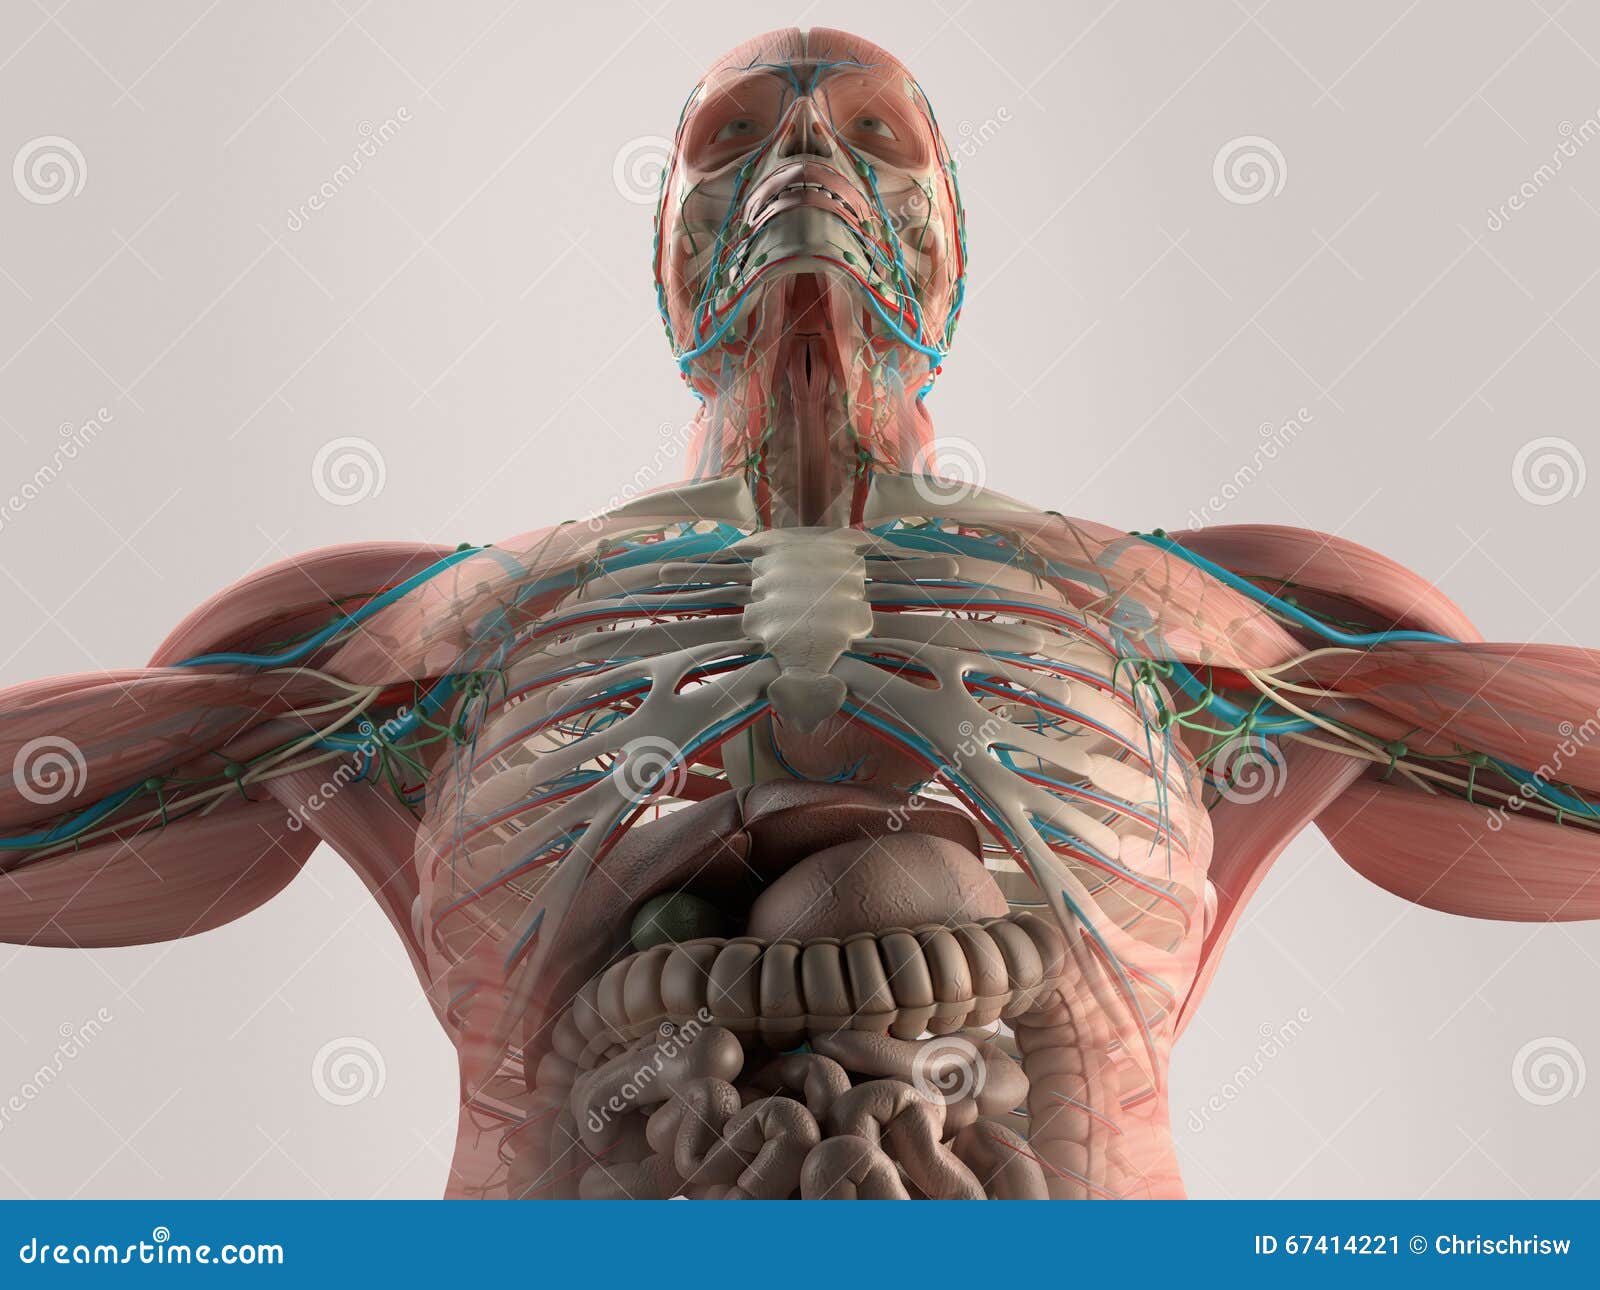 Chest Muscle Anatomy Diagram / Frontal View Of Male Chest And Abdominal Muscles Anatomy ...